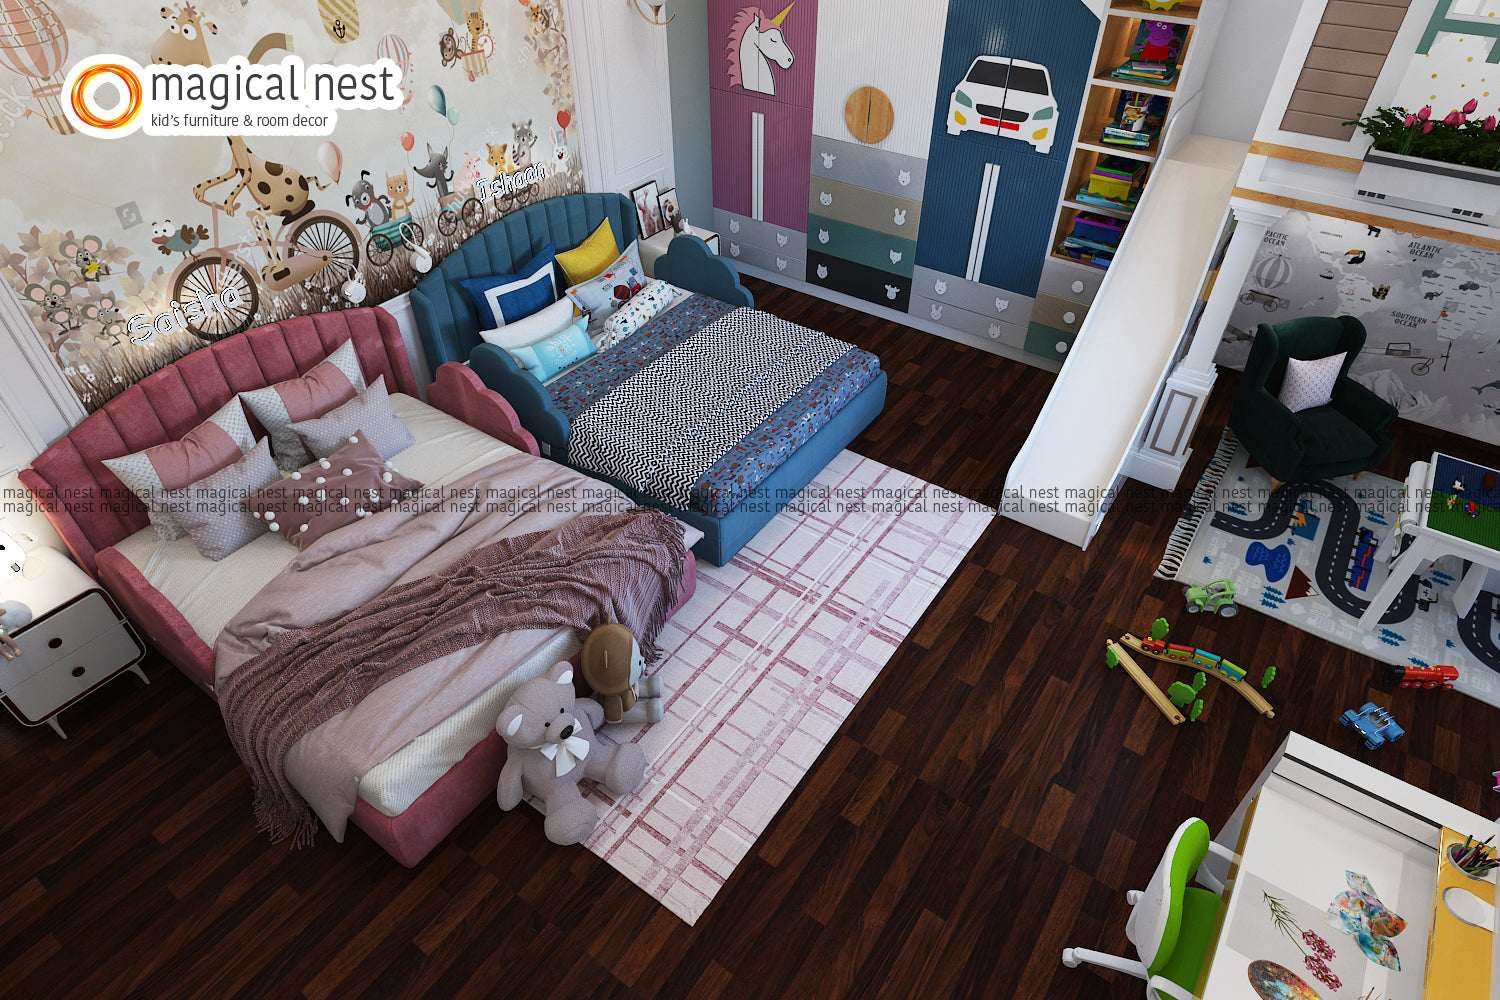 A cozy and imaginative child's room by Magical Nest with a whimsical forest wallpaper, a playful bed, a study area, and a toy-filled play space.